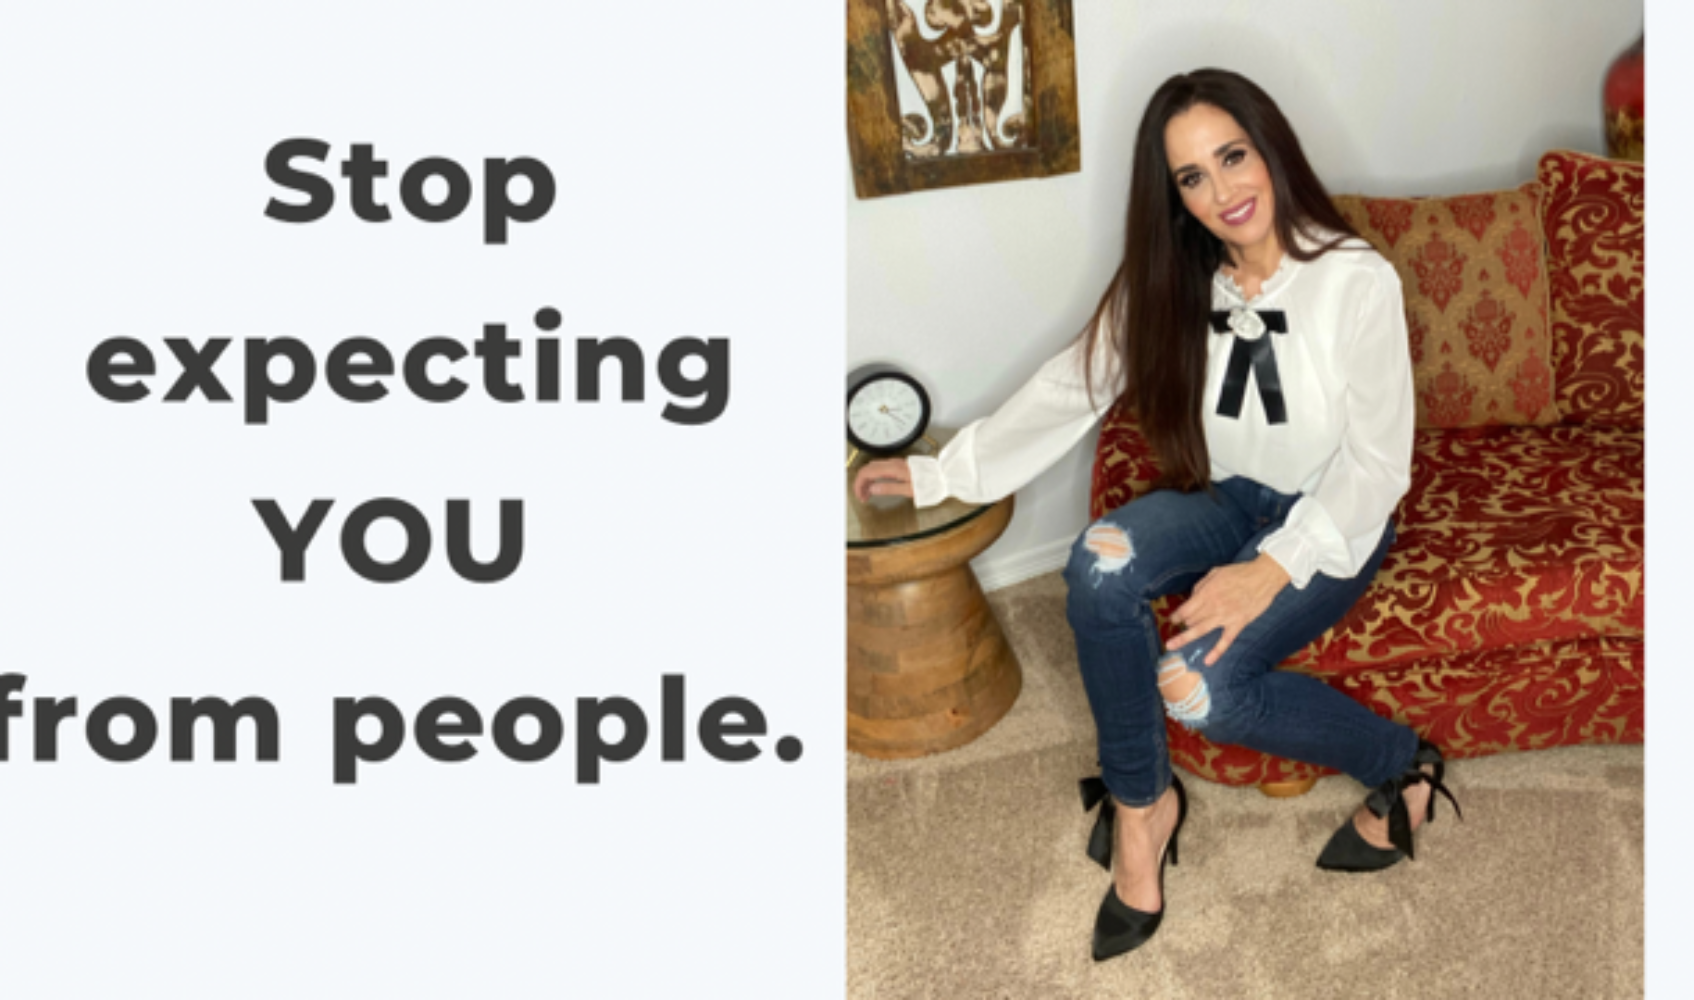 Stop expecting YOU from people.